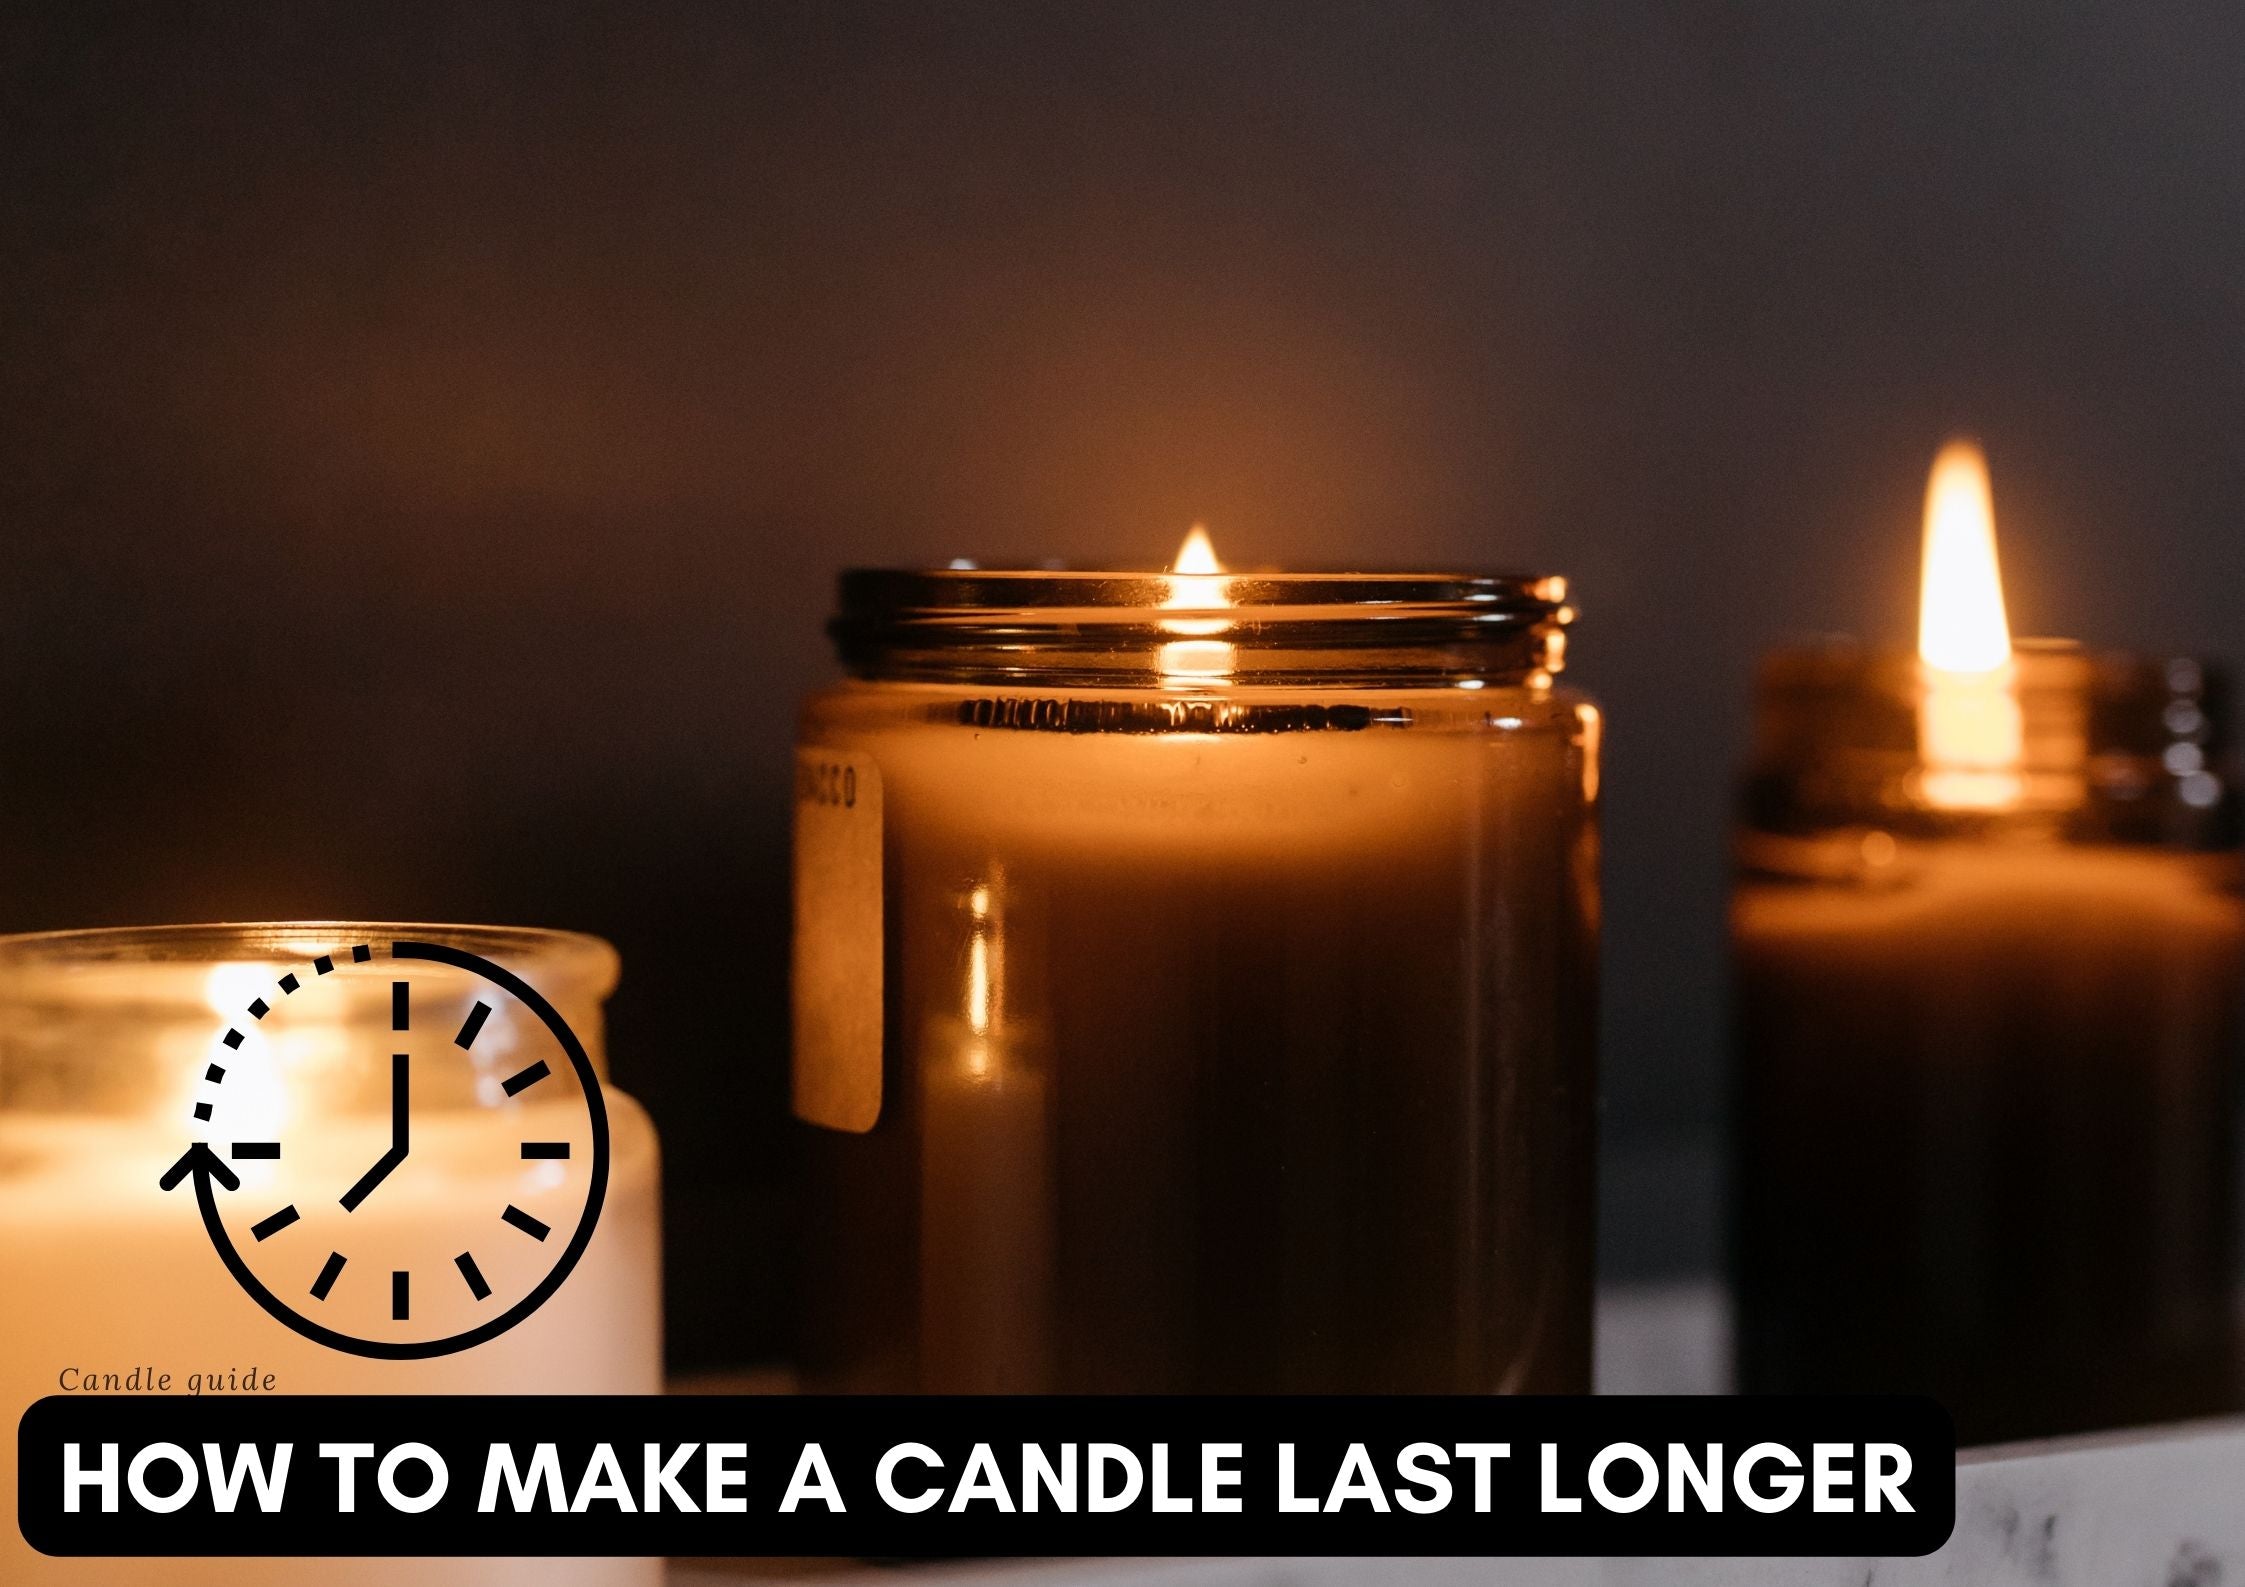 How to make a candle last longer